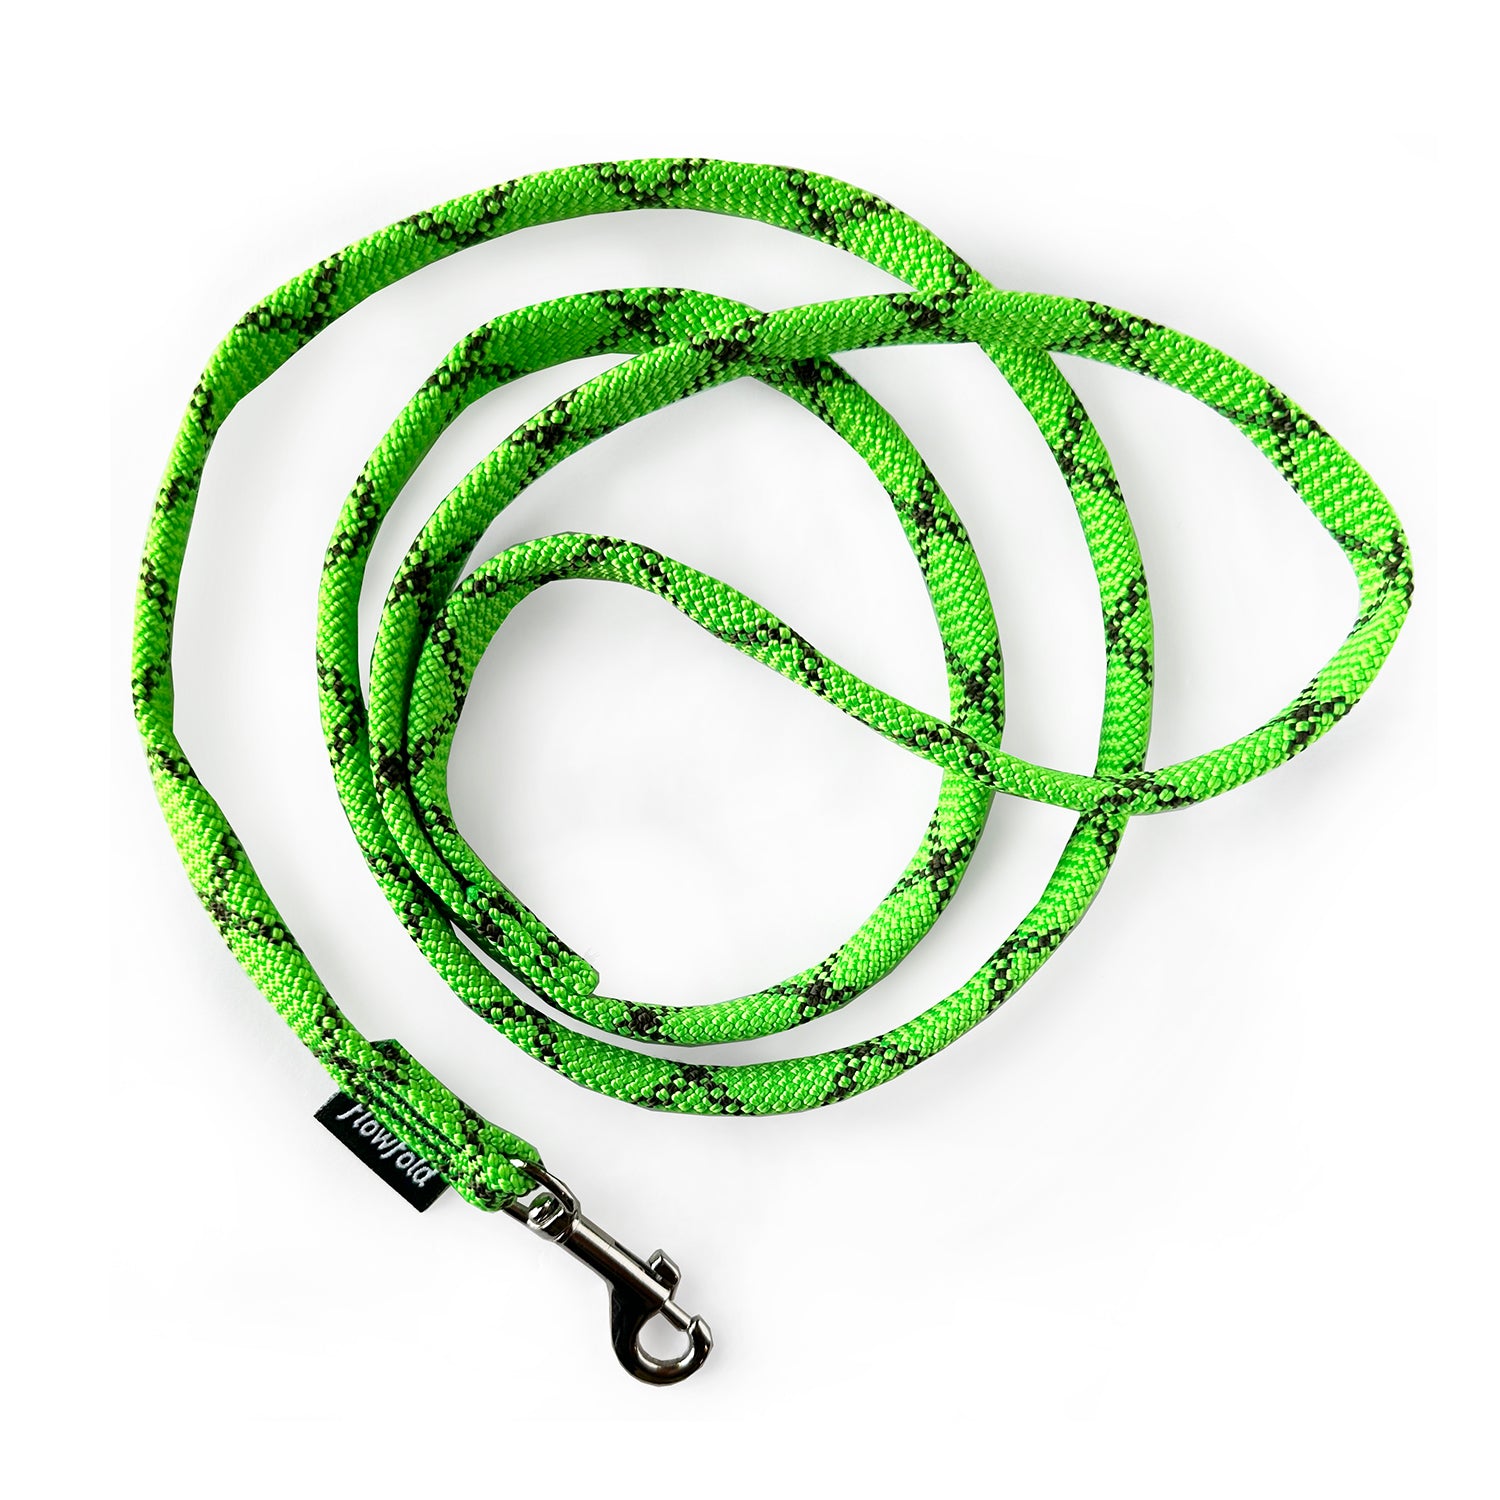 Flowfold Recycled Climbing Rope Dog Leash 4-Feet, Green Rope